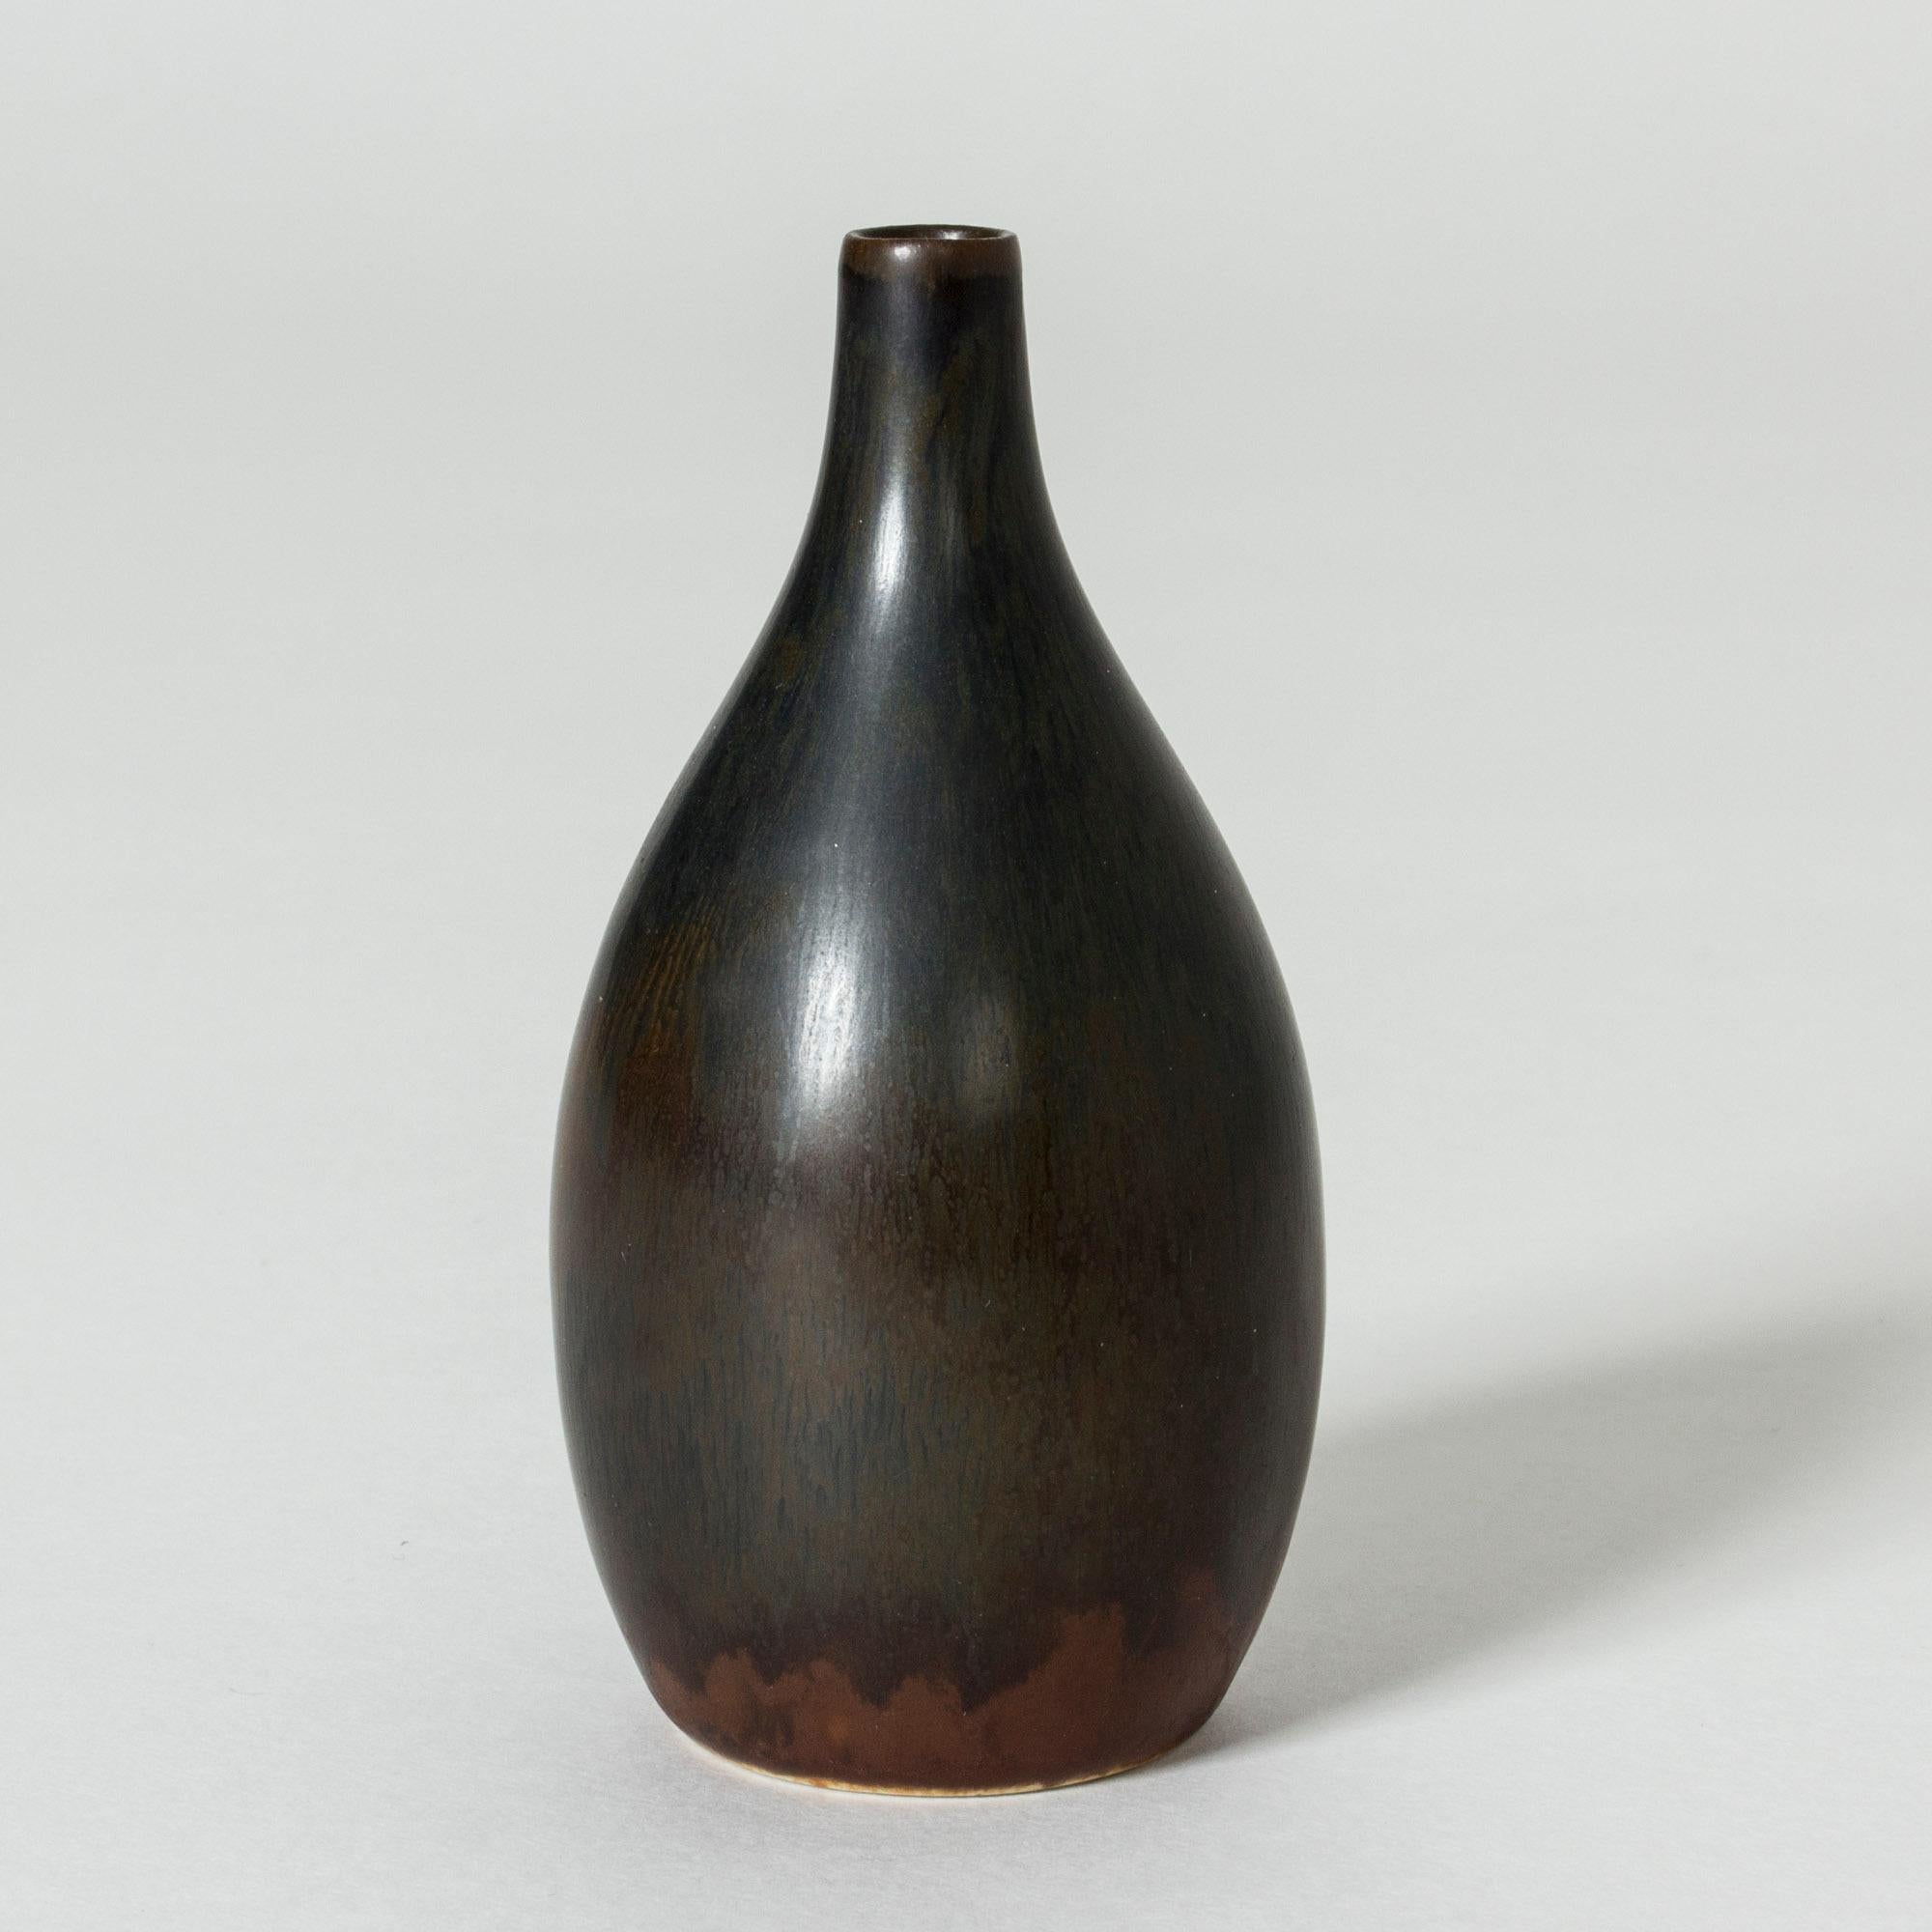 Cool, small stoneware vase by Carl-Harry Stålhane in a smooth, organic shape. Black glaze over rusty brown.